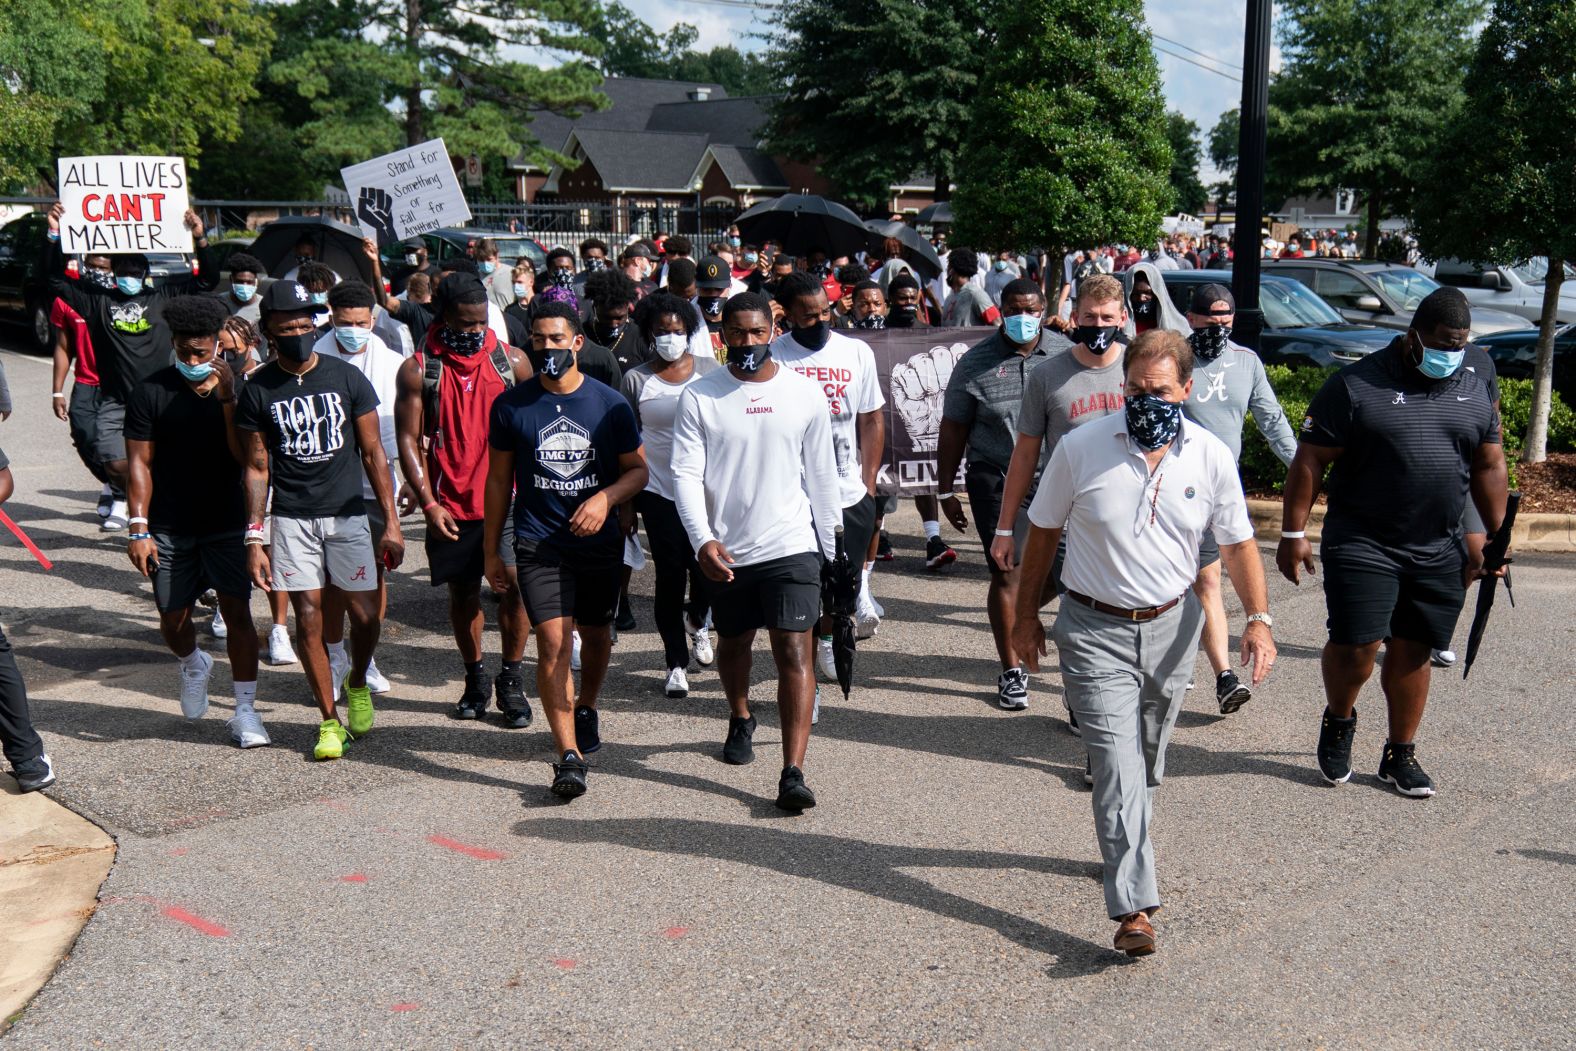 The University of Alabama football team, led by coach Nick Saban, marches on campus in support of the Black Lives Matter movement.